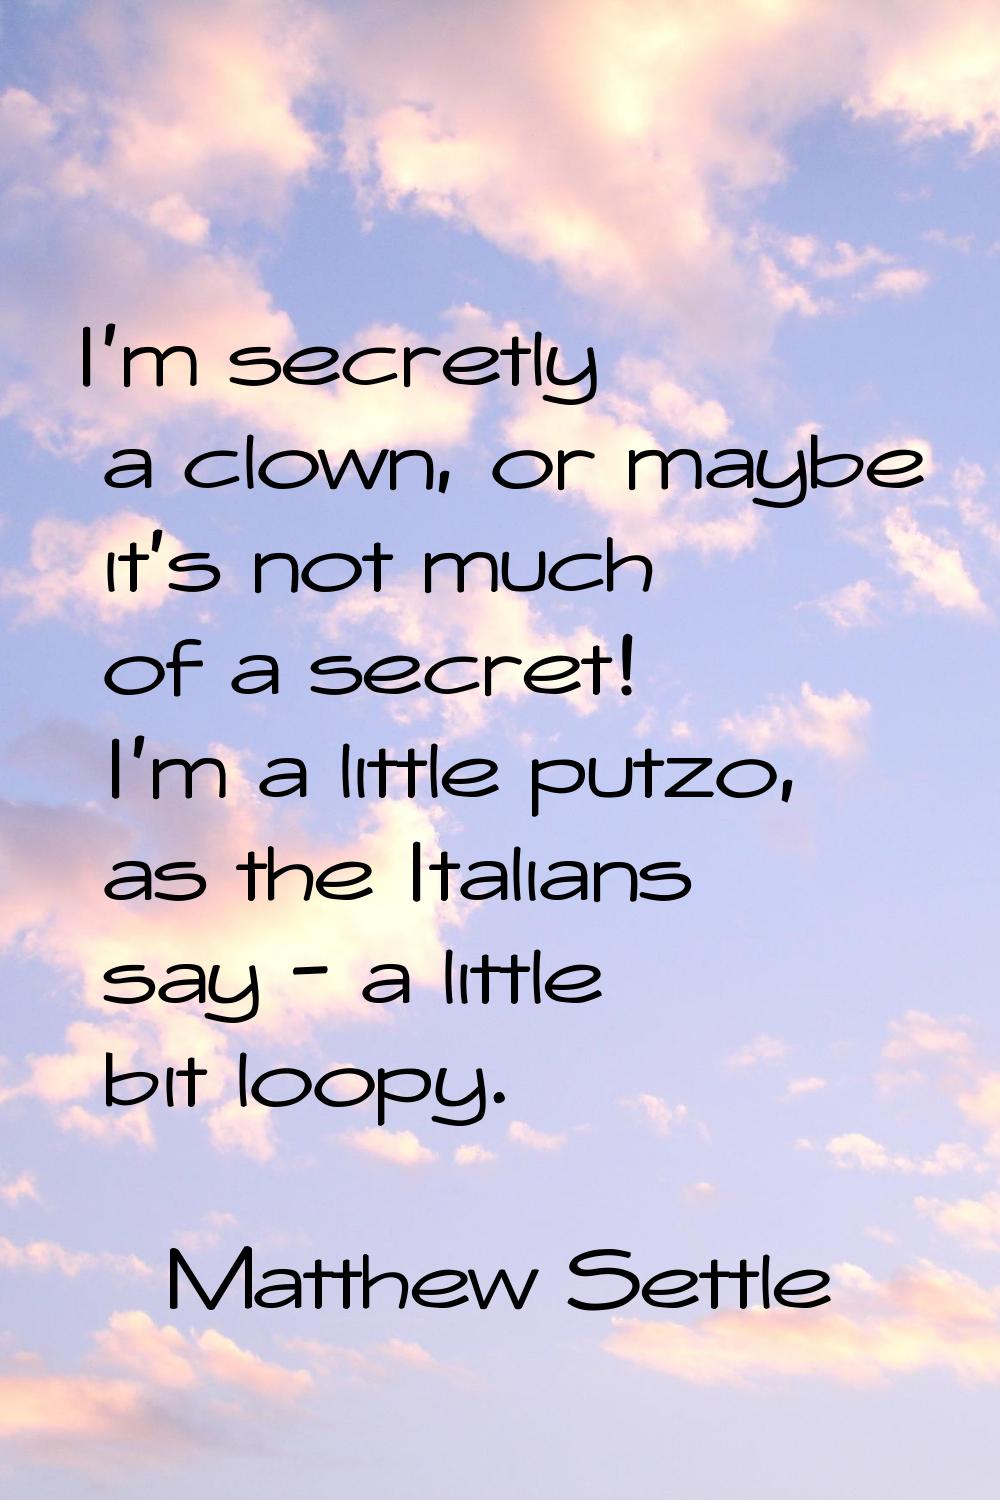 I'm secretly a clown, or maybe it's not much of a secret! I'm a little putzo, as the Italians say -